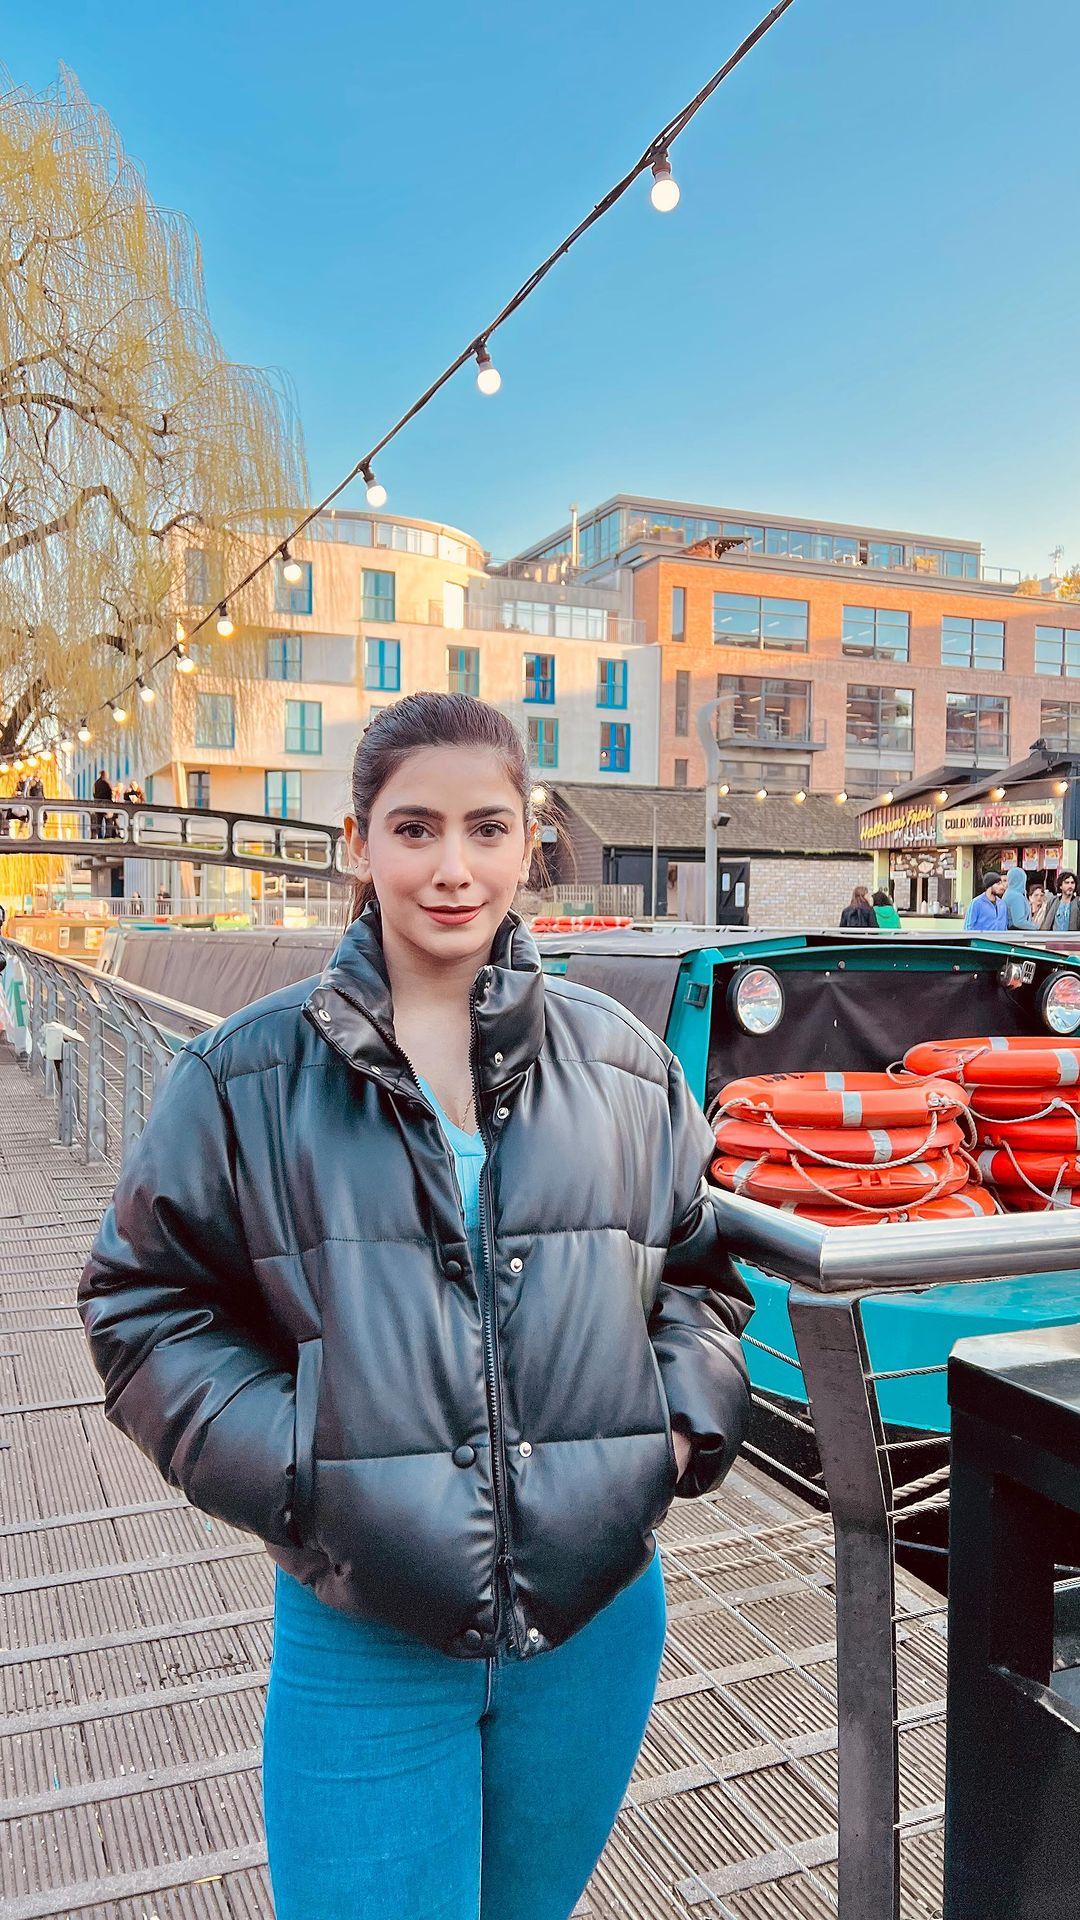 Come explore the #CamdenMarket with me! ✨